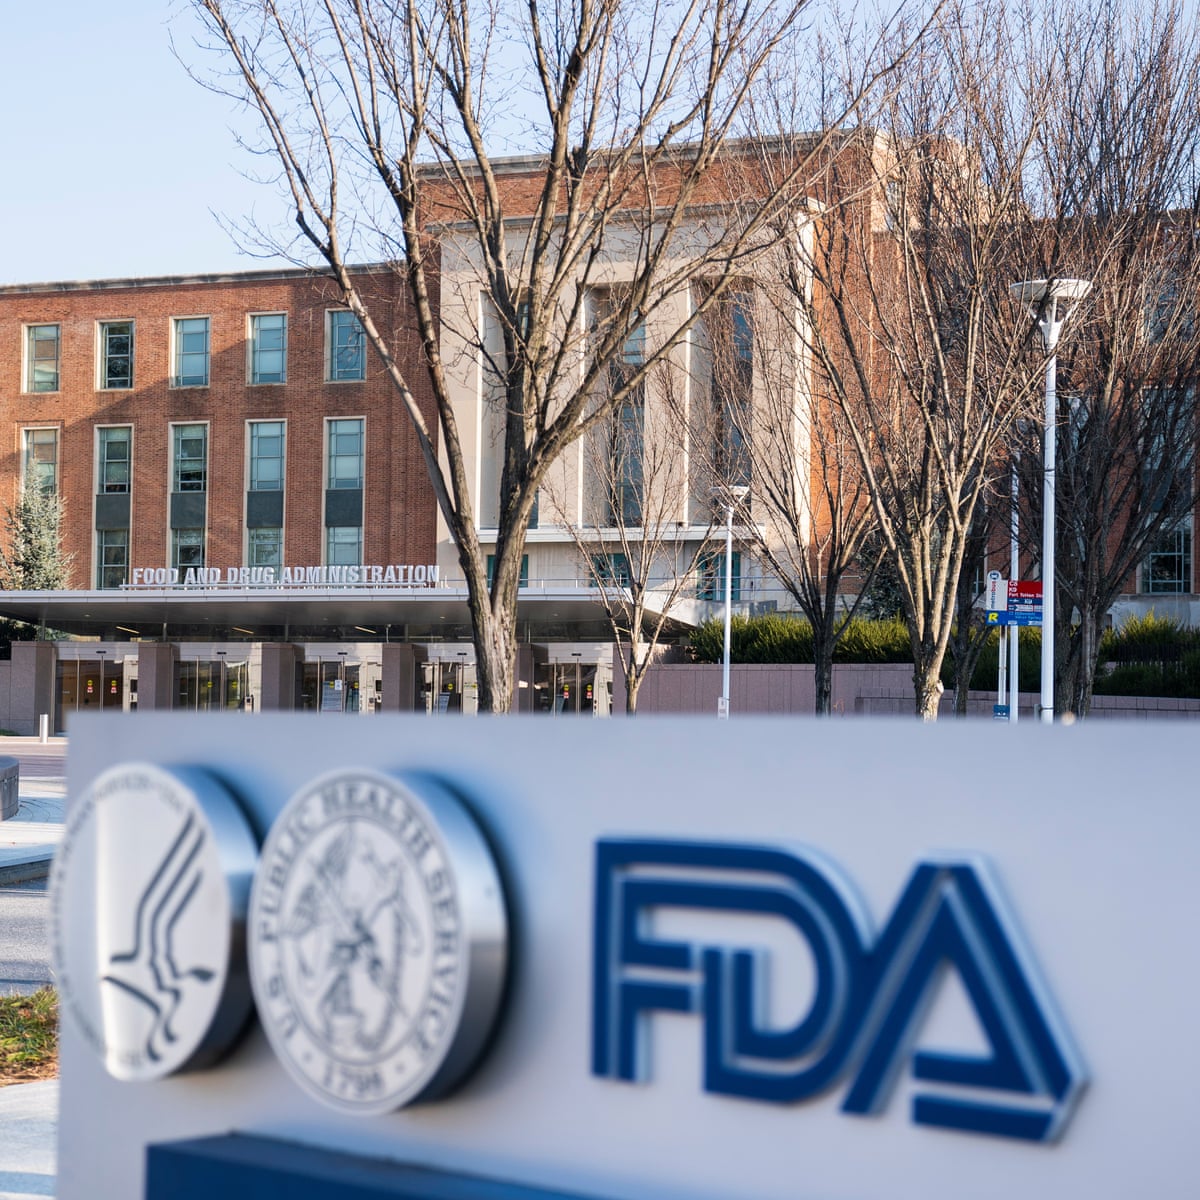 Covid19: FDA issues emergency use authorization for Pfizer vaccine